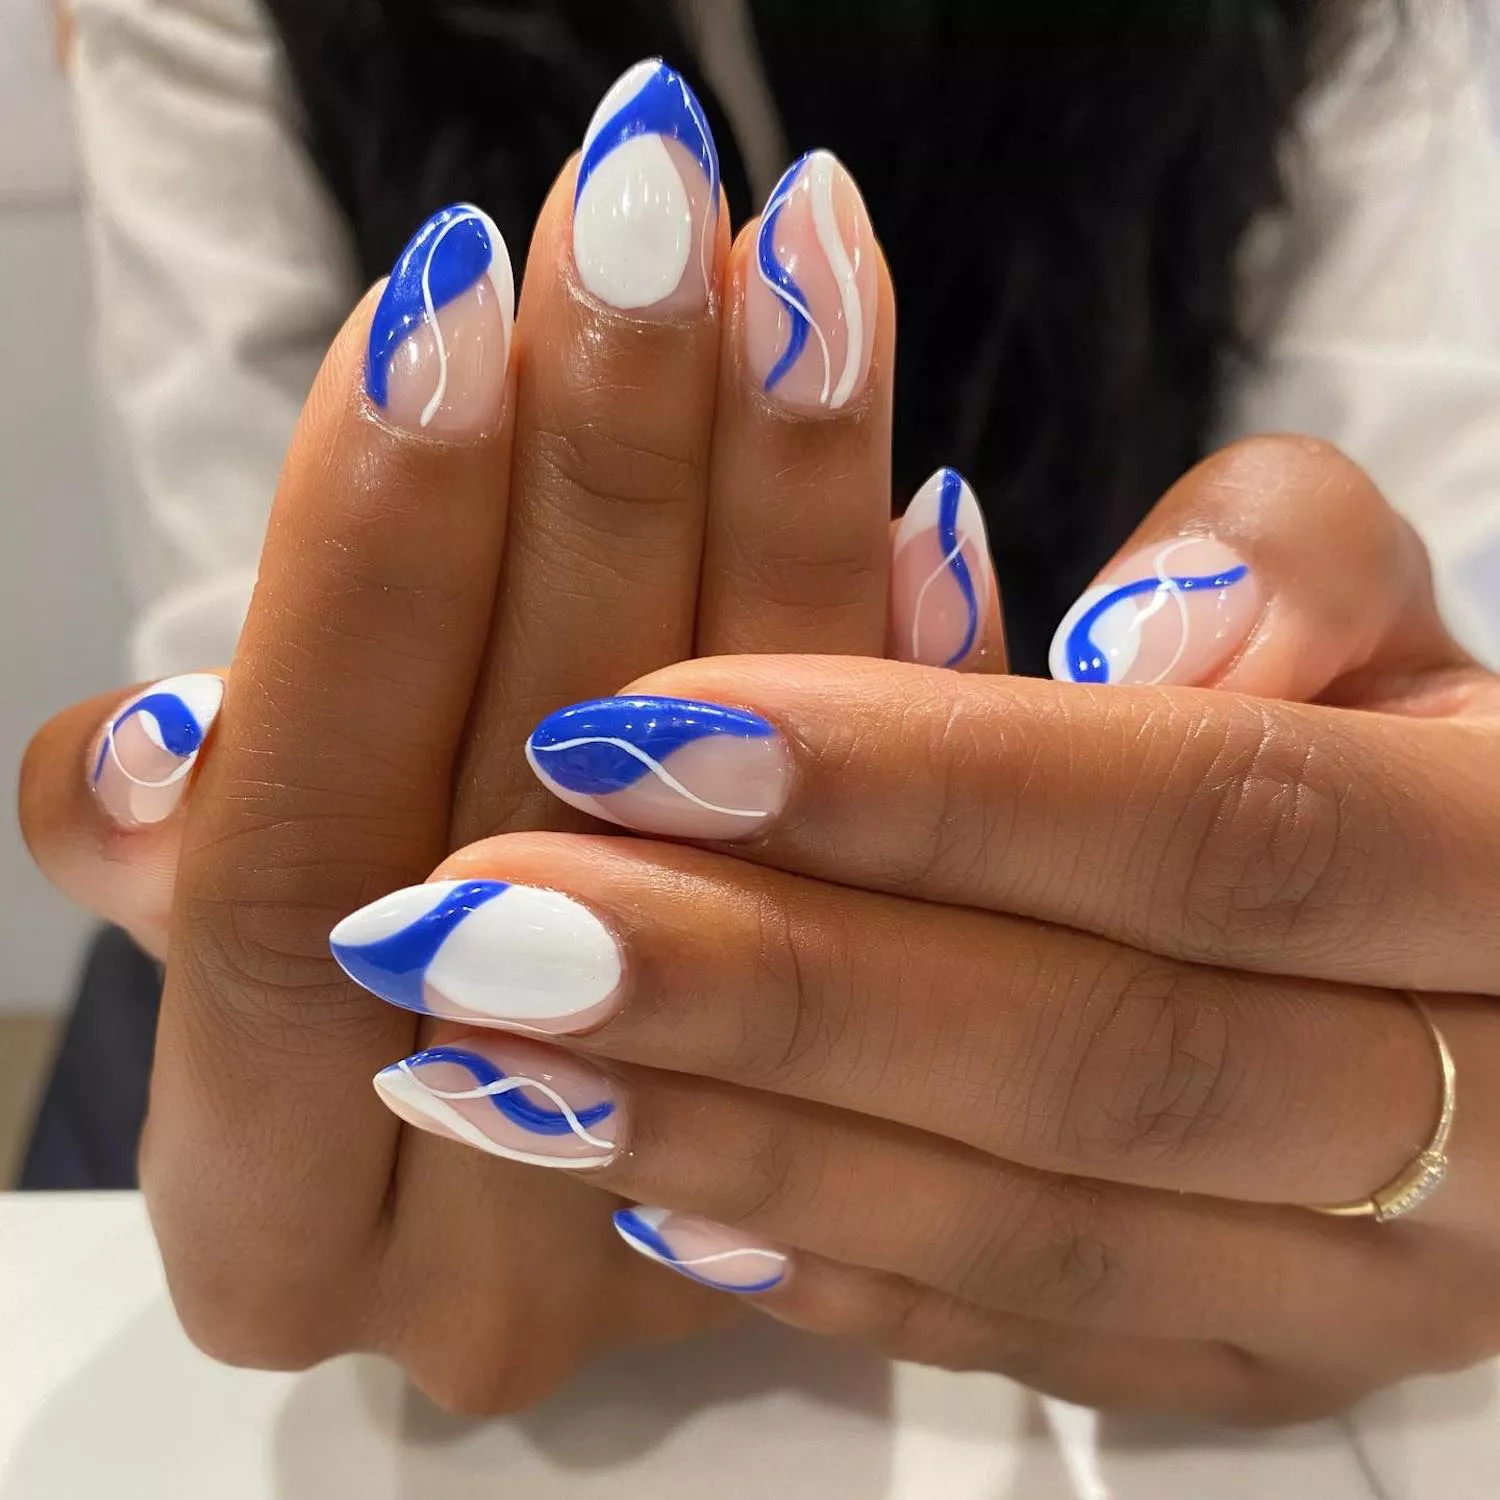 Manicure with blue and white wave and line designs